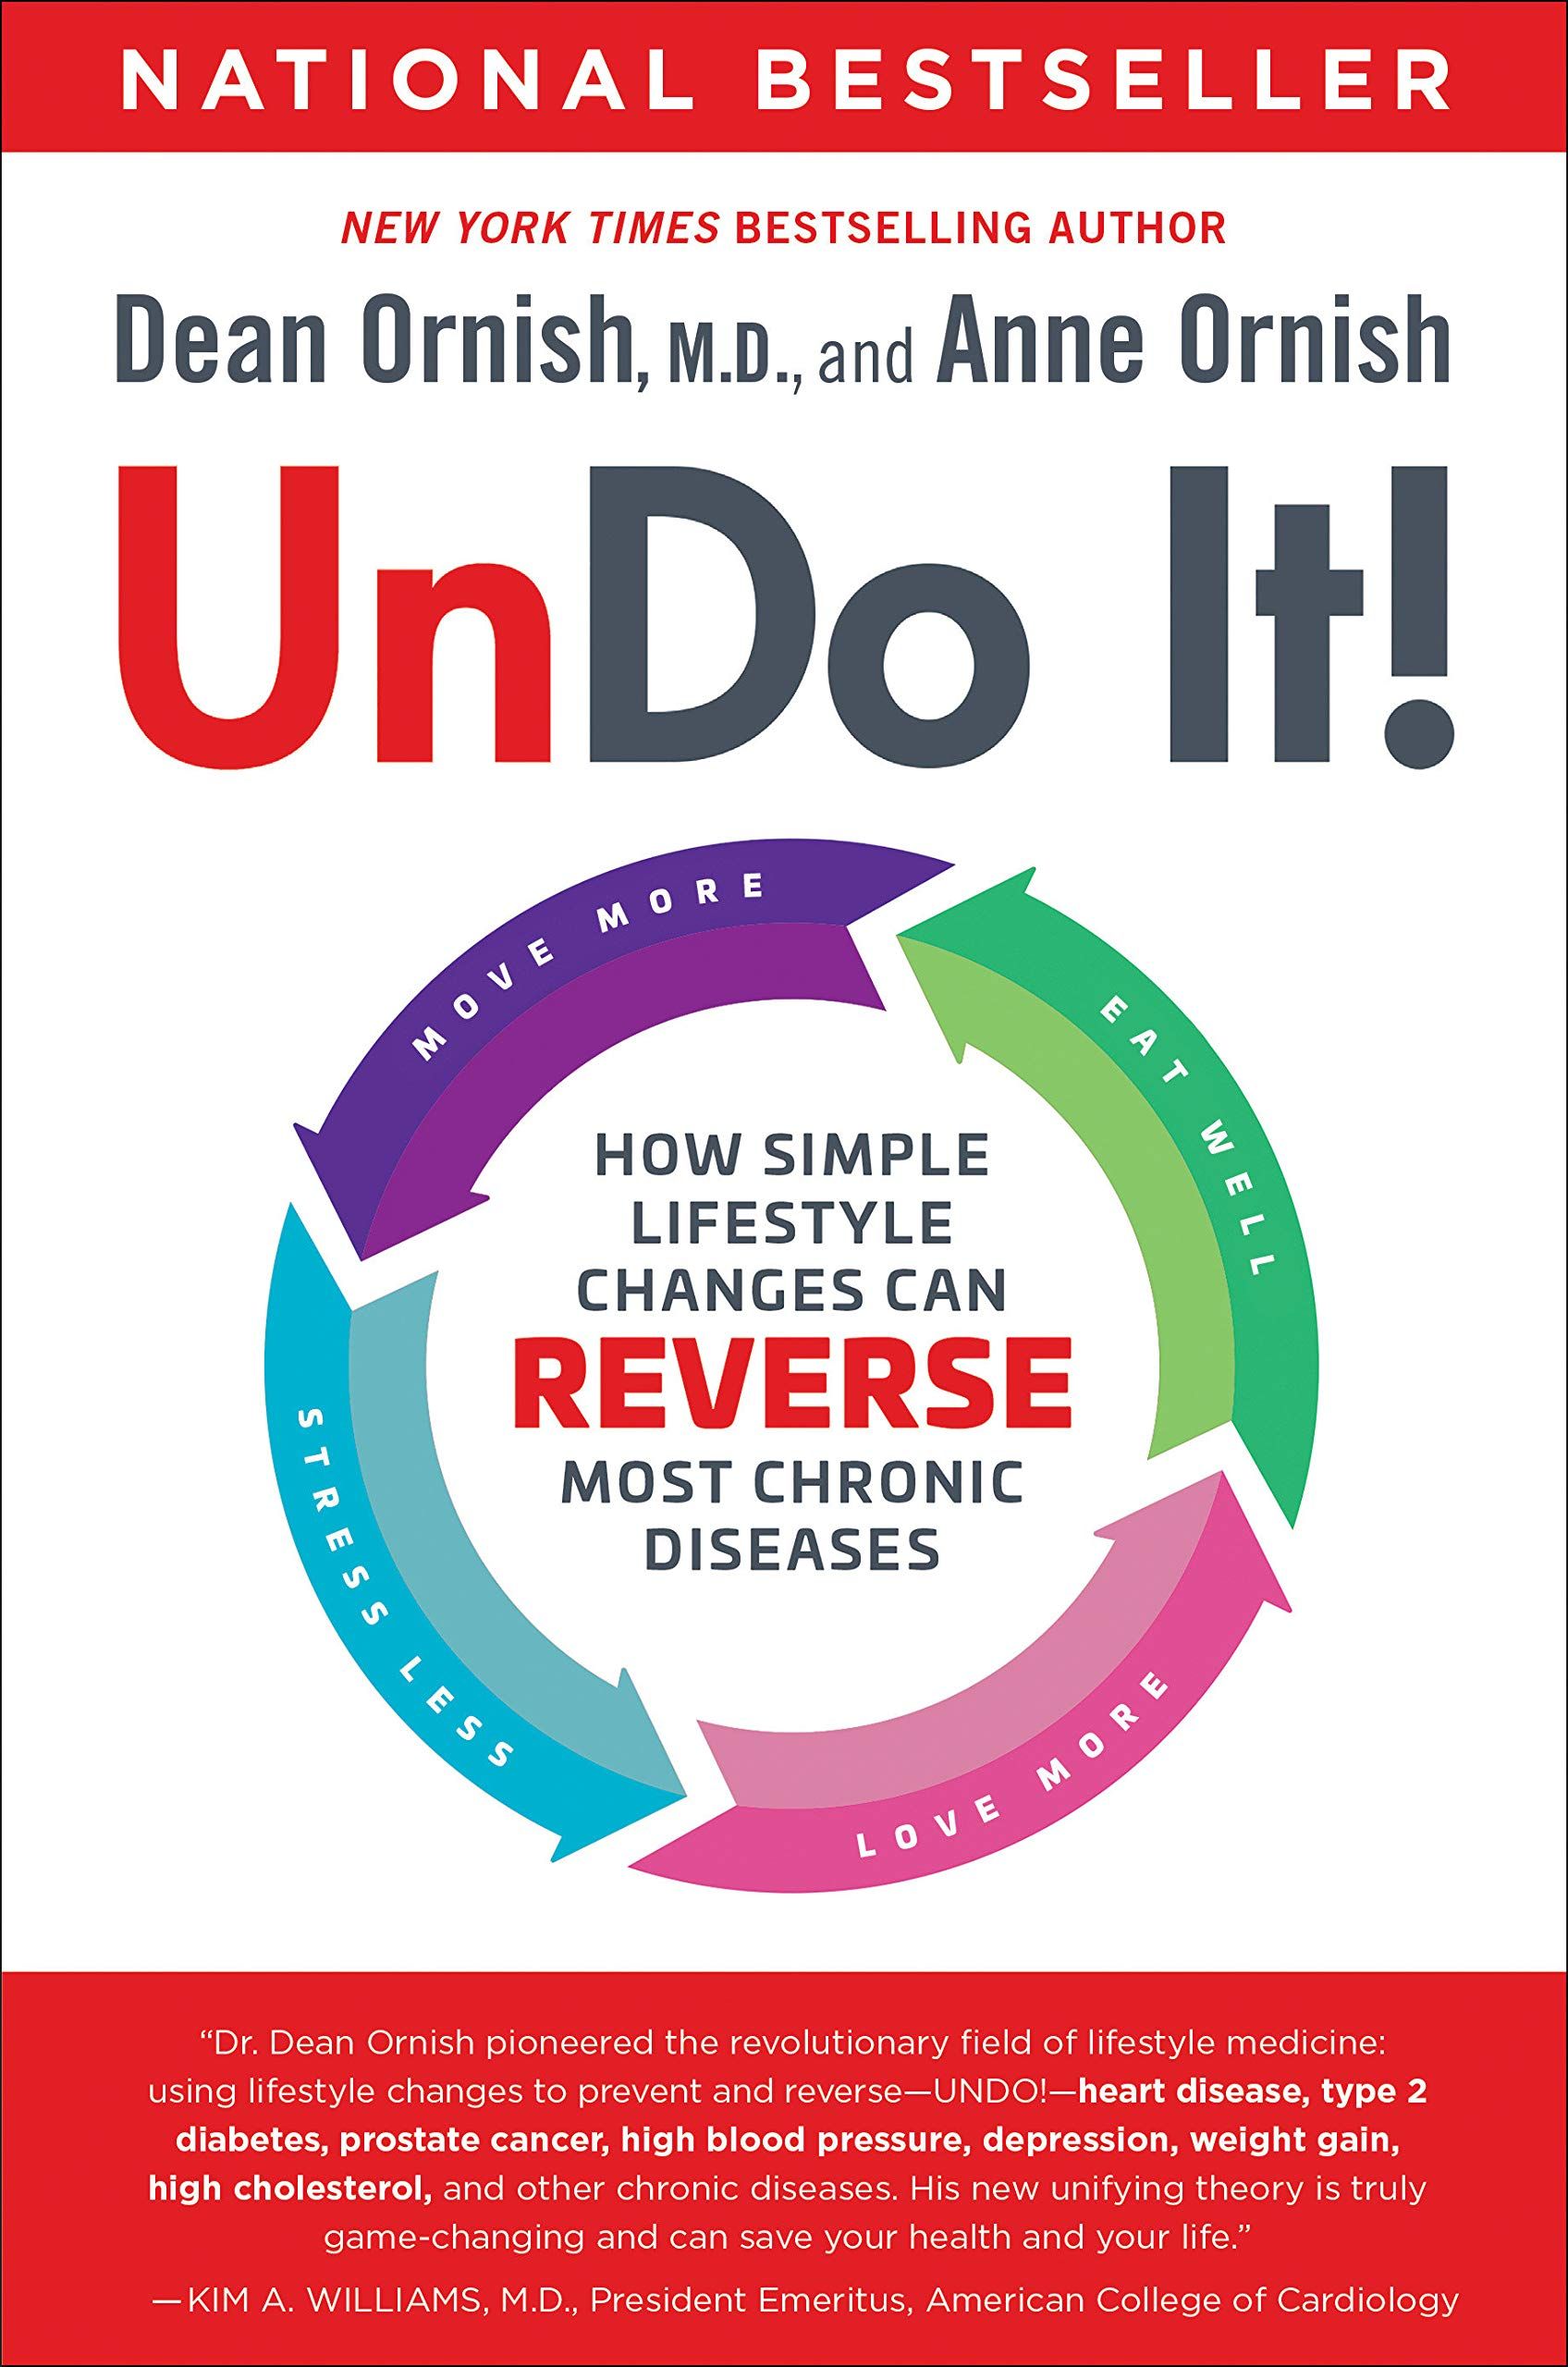 Cover of the book "UnDo it! How simple lifestyle changes can reverse most chronic diseases" by Dean Ornish